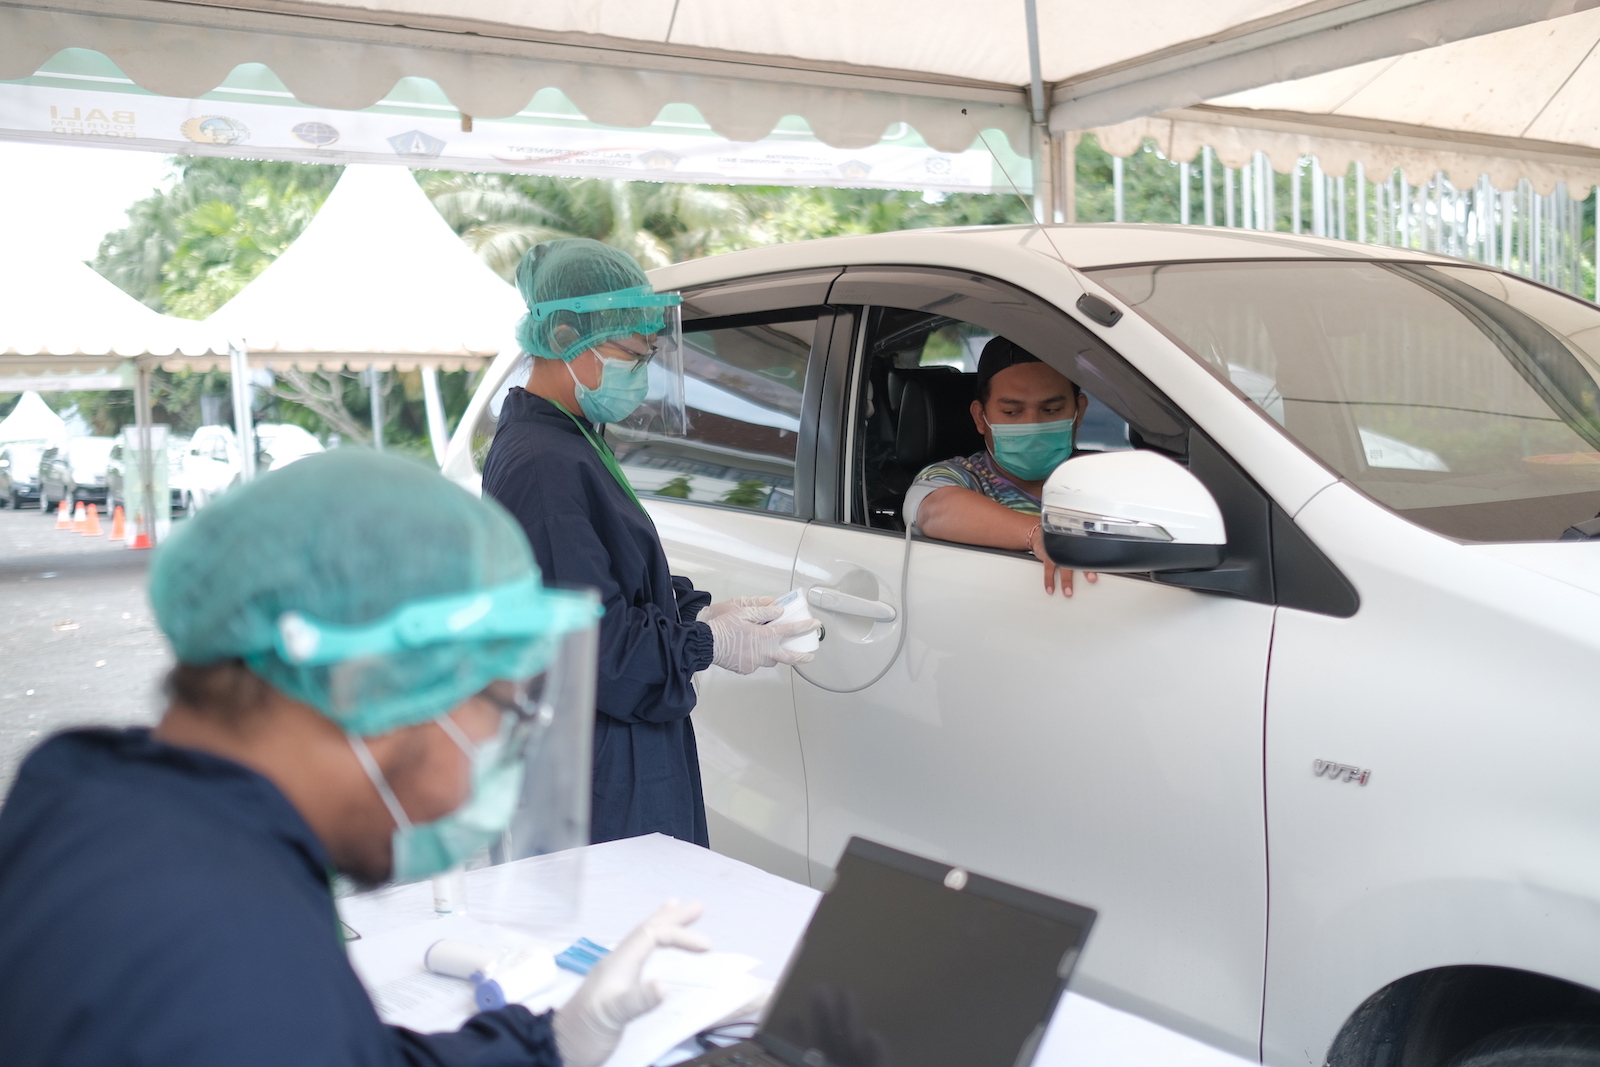 The first run of the drive-thru vaccination program at the center in Nusa Dua, Bali will be held until March 5, 2021. Photo: Grab 